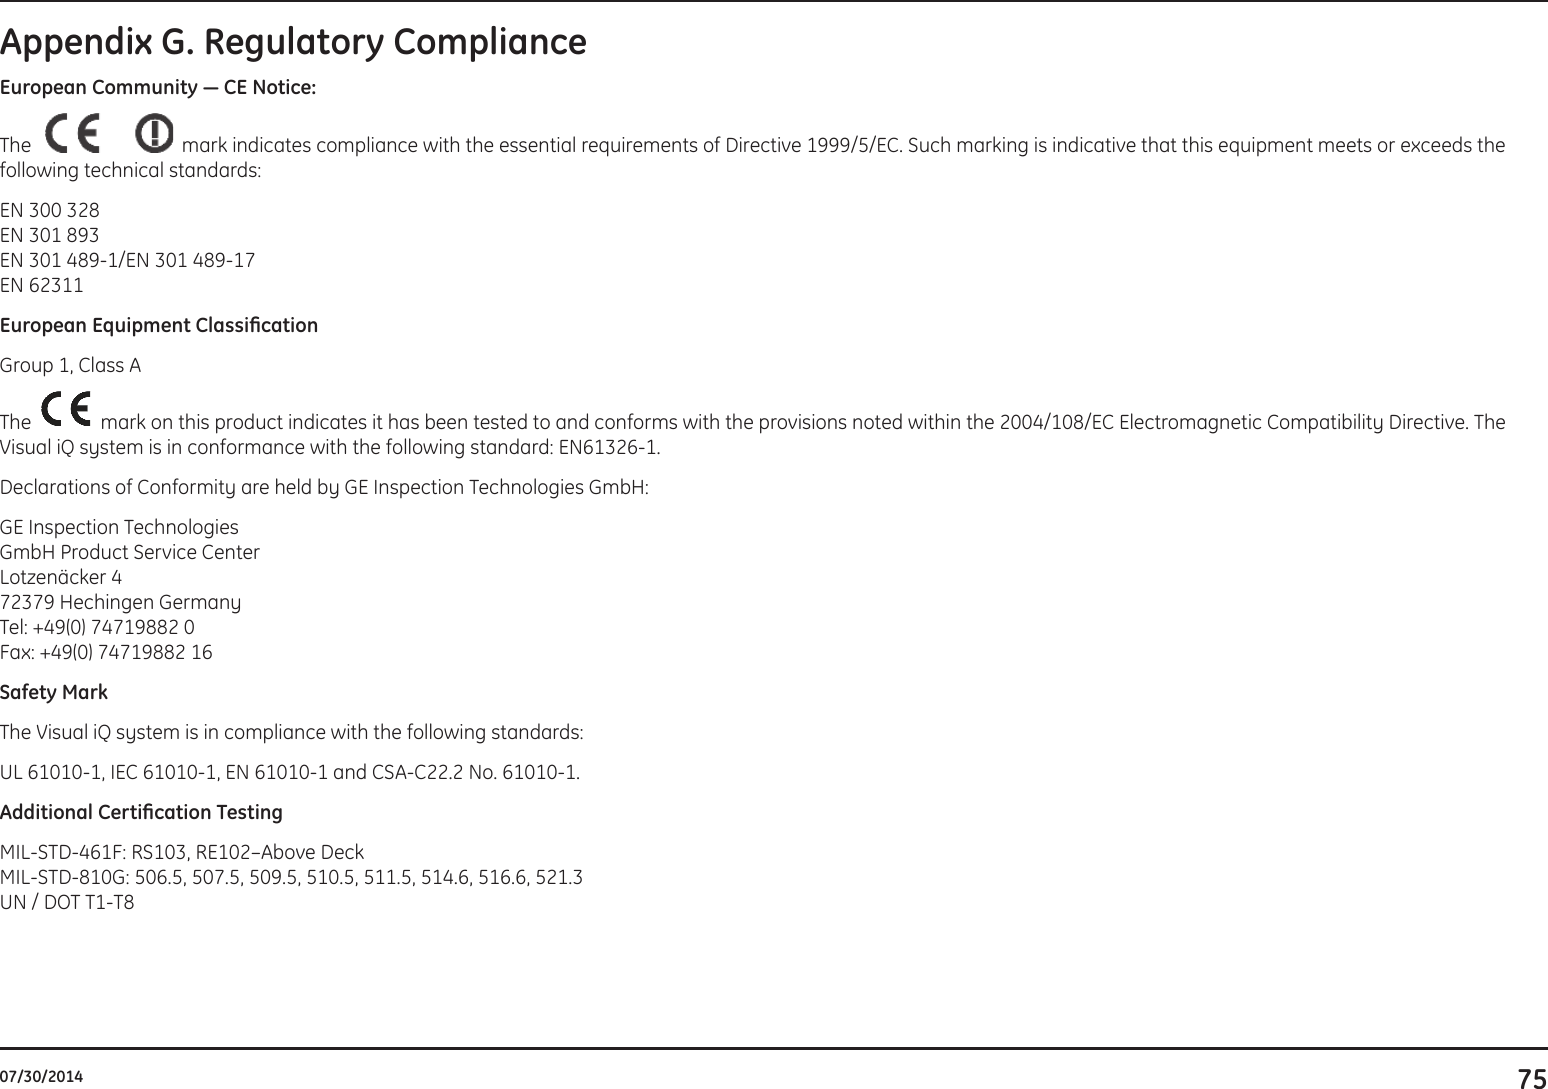 7507/30/2014Appendix G. Regulatory ComplianceEuropeanCommunity—CENotice:The  mark indicates compliance with the essential requirements of Directive 1999/5/EC. Such marking is indicative that this equipment meets or exceeds the following technical standards: EN 300 328EN 301 893EN 301 489-1/EN 301 489-17EN 62311EuropeanEquipmentClassicationGroup 1, Class AThe    mark on this product indicates it has been tested to and conforms with the provisions noted within the 2004/108/EC Electromagnetic Compatibility Directive. The Visual iQ system is in conformance with the following standard: EN61326-1.Declarations of Conformity are held by GE Inspection Technologies GmbH:GE Inspection TechnologiesGmbH Product Service CenterLotzenäcker 472379 Hechingen GermanyTel: +49(0) 74719882 0Fax: +49(0) 74719882 16Safety MarkThe Visual iQ system is in compliance with the following standards:UL 61010-1, IEC 61010-1, EN 61010-1 and CSA-C22.2 No. 61010-1.AdditionalCerticationTestingMIL-STD-461F: RS103, RE102–Above DeckMIL-STD-810G: 506.5, 507.5, 509.5, 510.5, 511.5, 514.6, 516.6, 521.3UN / DOT T1-T8